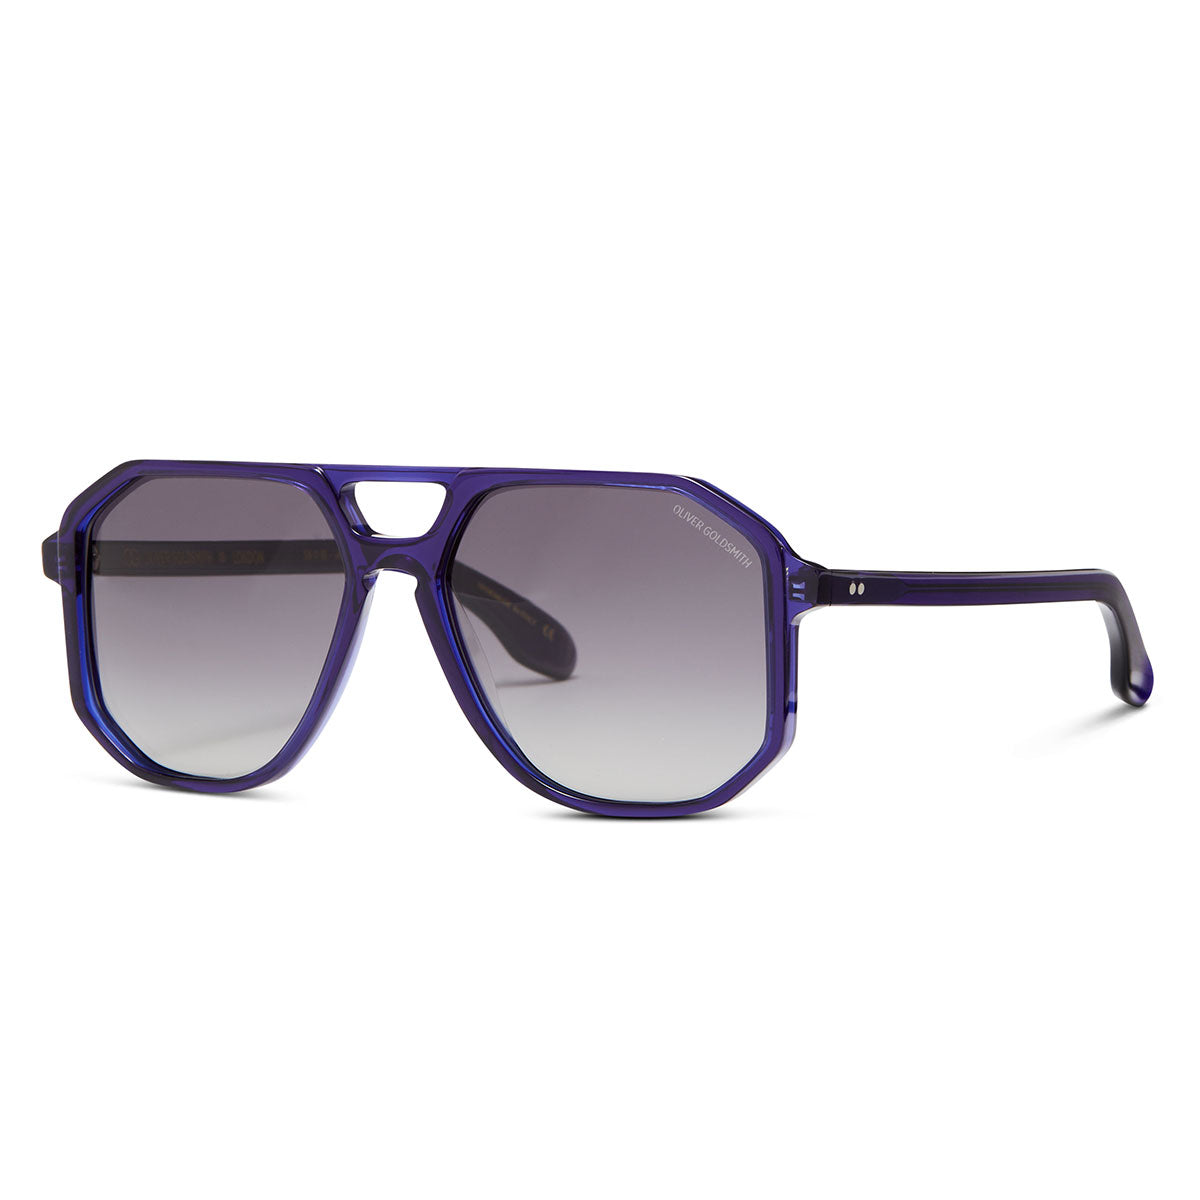 Spillane Sunglasses with Navy acetate frame